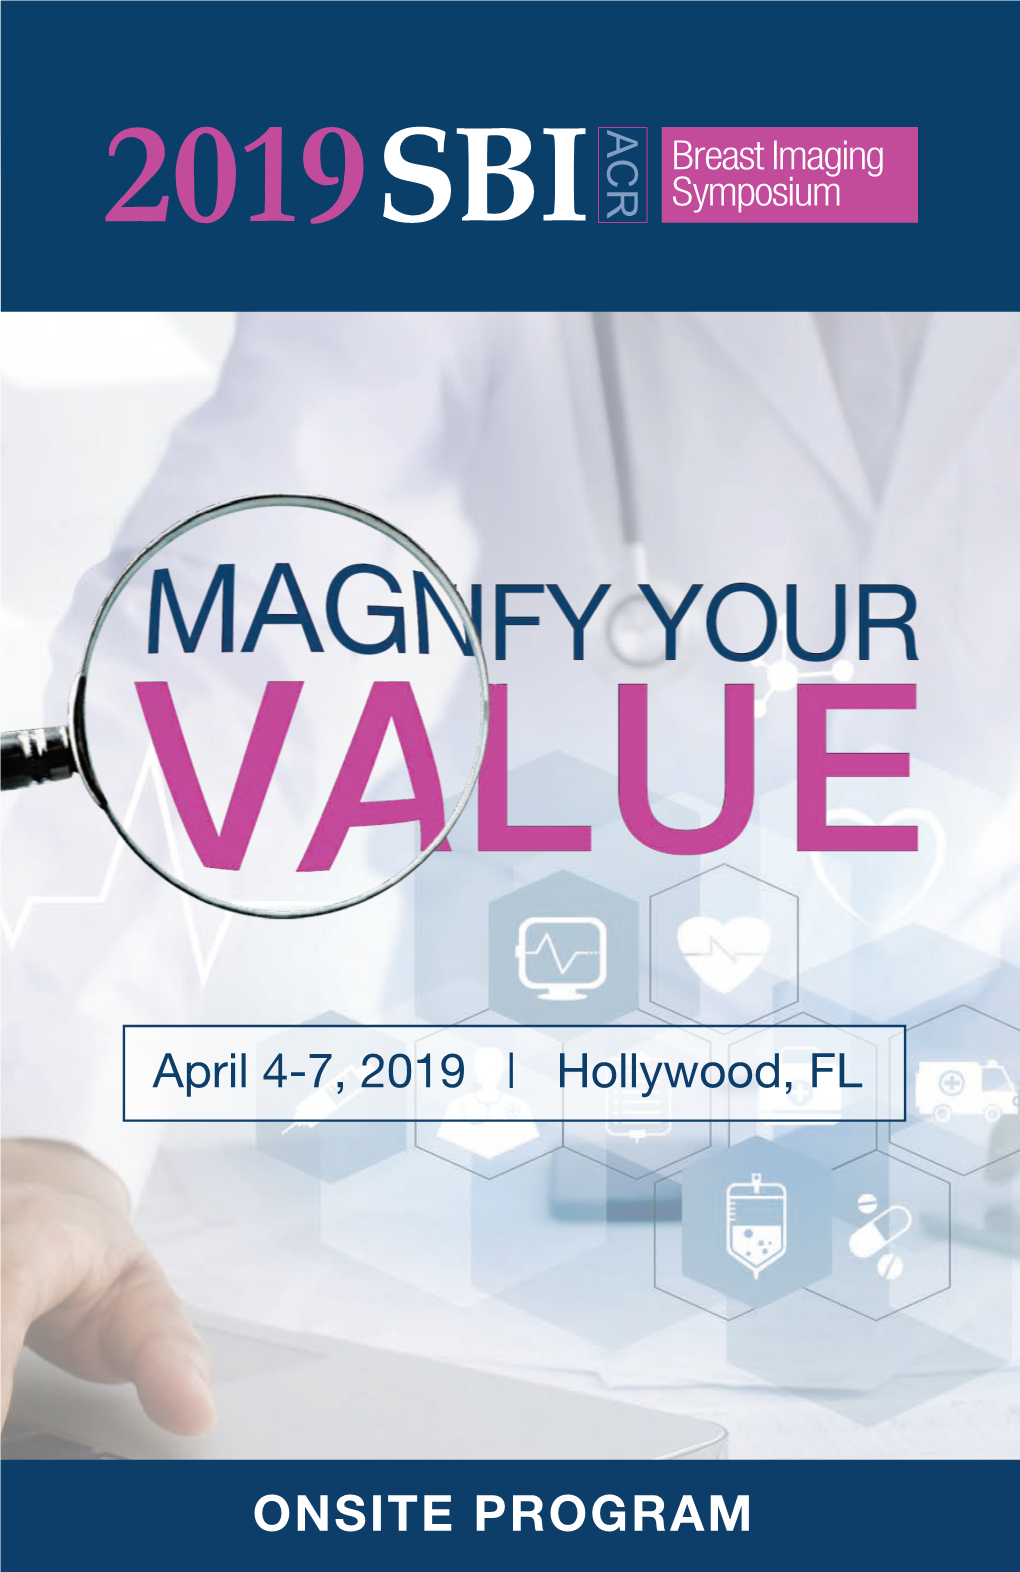 Onsite Program | 1 Welcome to the 2019 SBI/ACR Breast Imaging Symposium